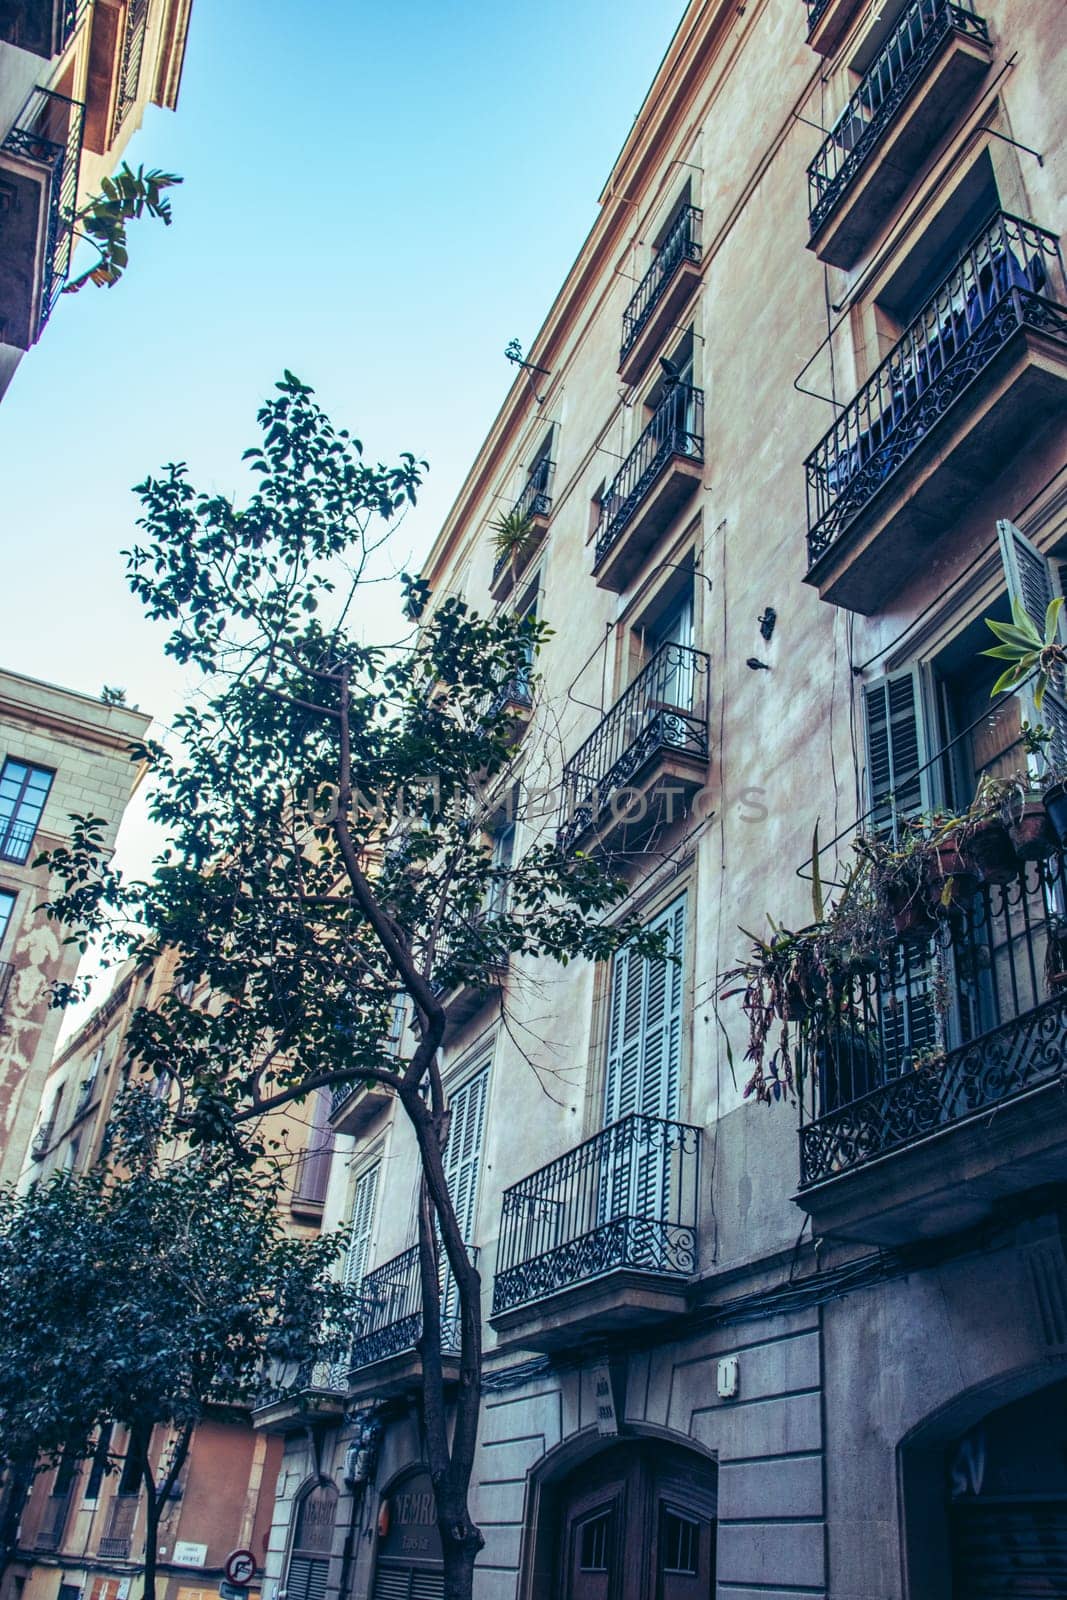 Empty street at day time in Barcelona, Spain photo. Historical building on Rambla street cityscape image. Beautiful urban scenery photography. Street scene. High quality picture for wallpaper, article